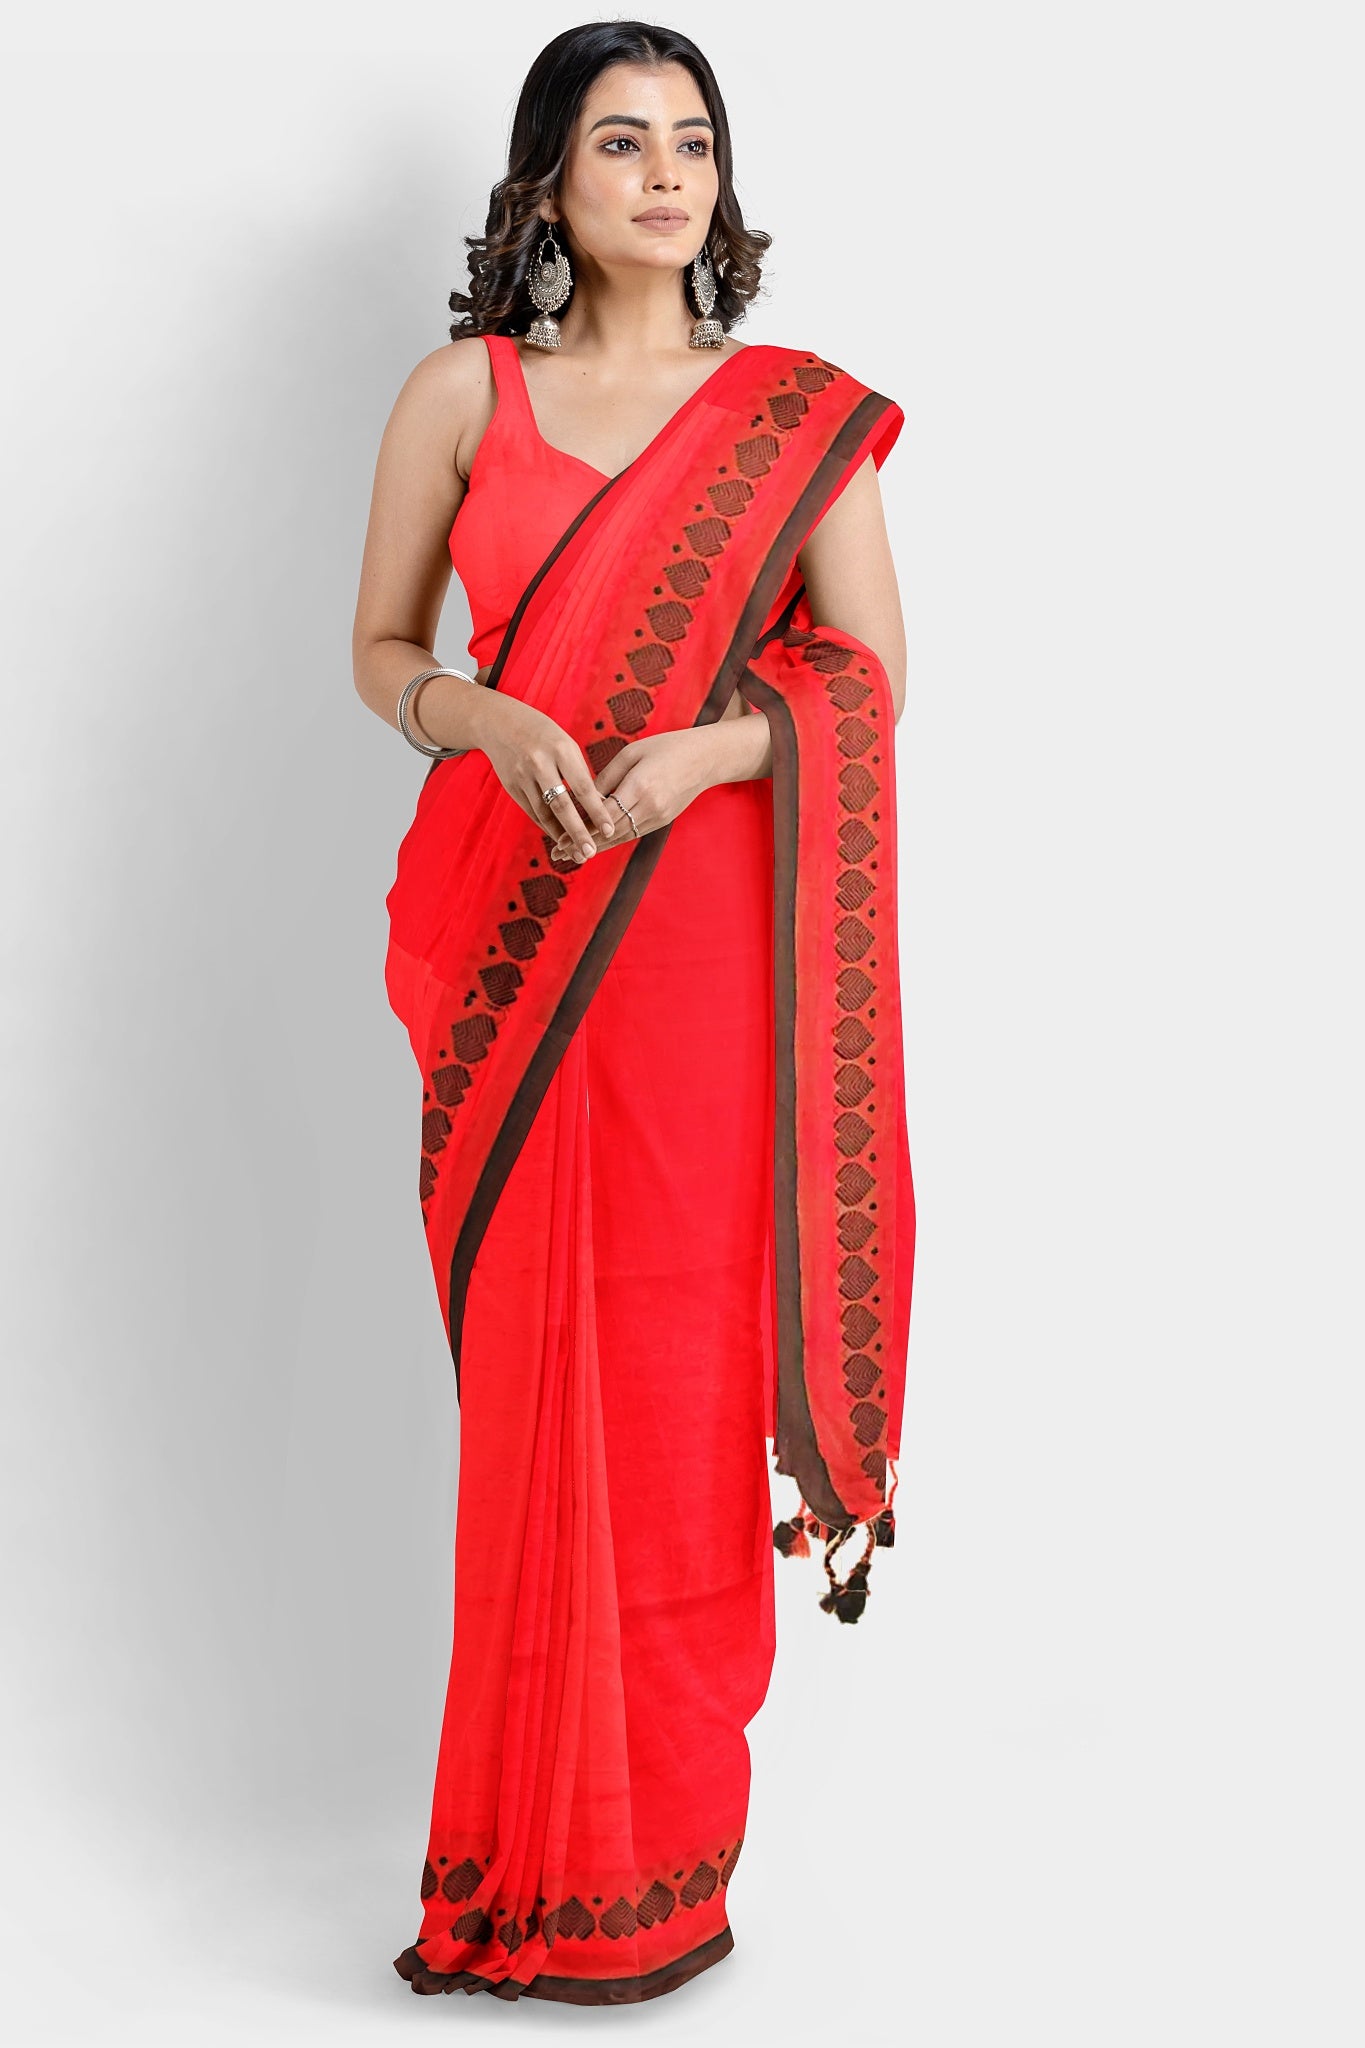 Shop the Hottest Formal Saree for Office Online Now